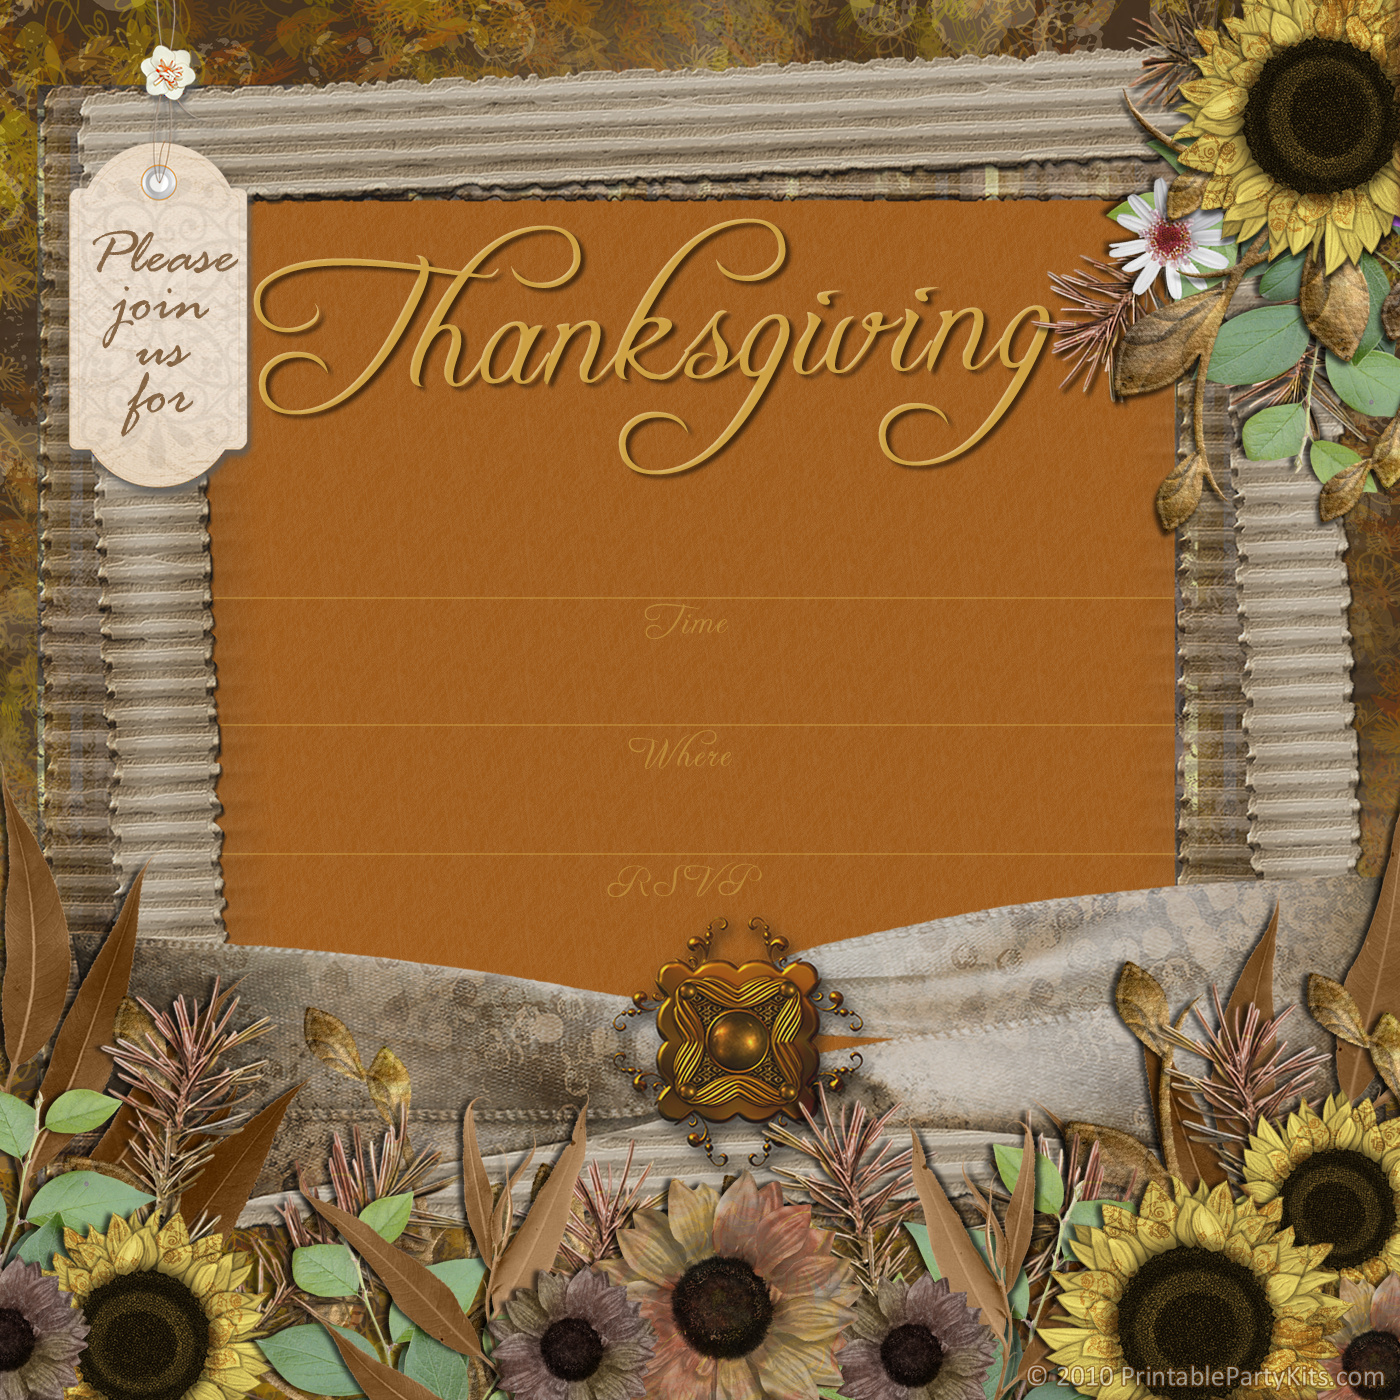 Free Printable Party Invitations Thanksgiving Dinner Party Invitations